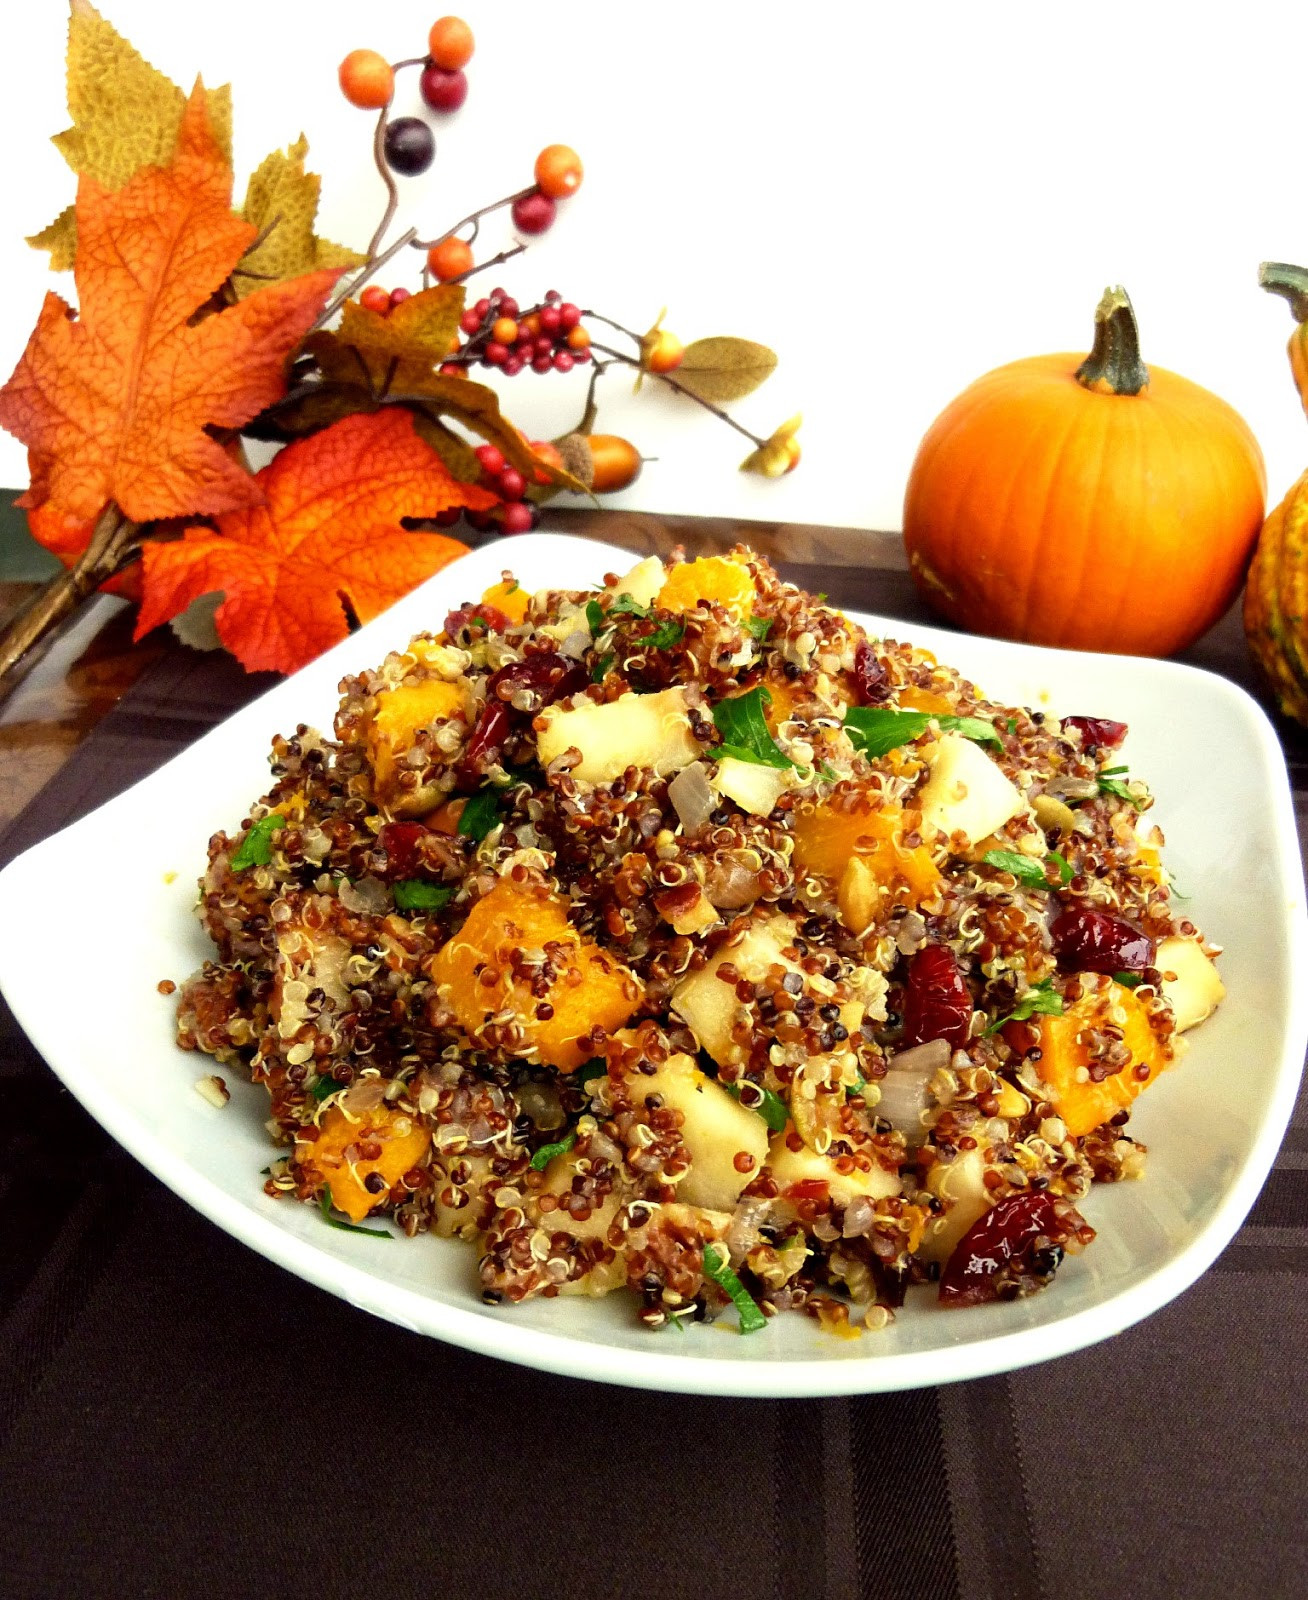 Vegetarian Main Dishes For Thanksgiving
 Vanilla & Spice Recipes for a Ve arian Thanksgiving